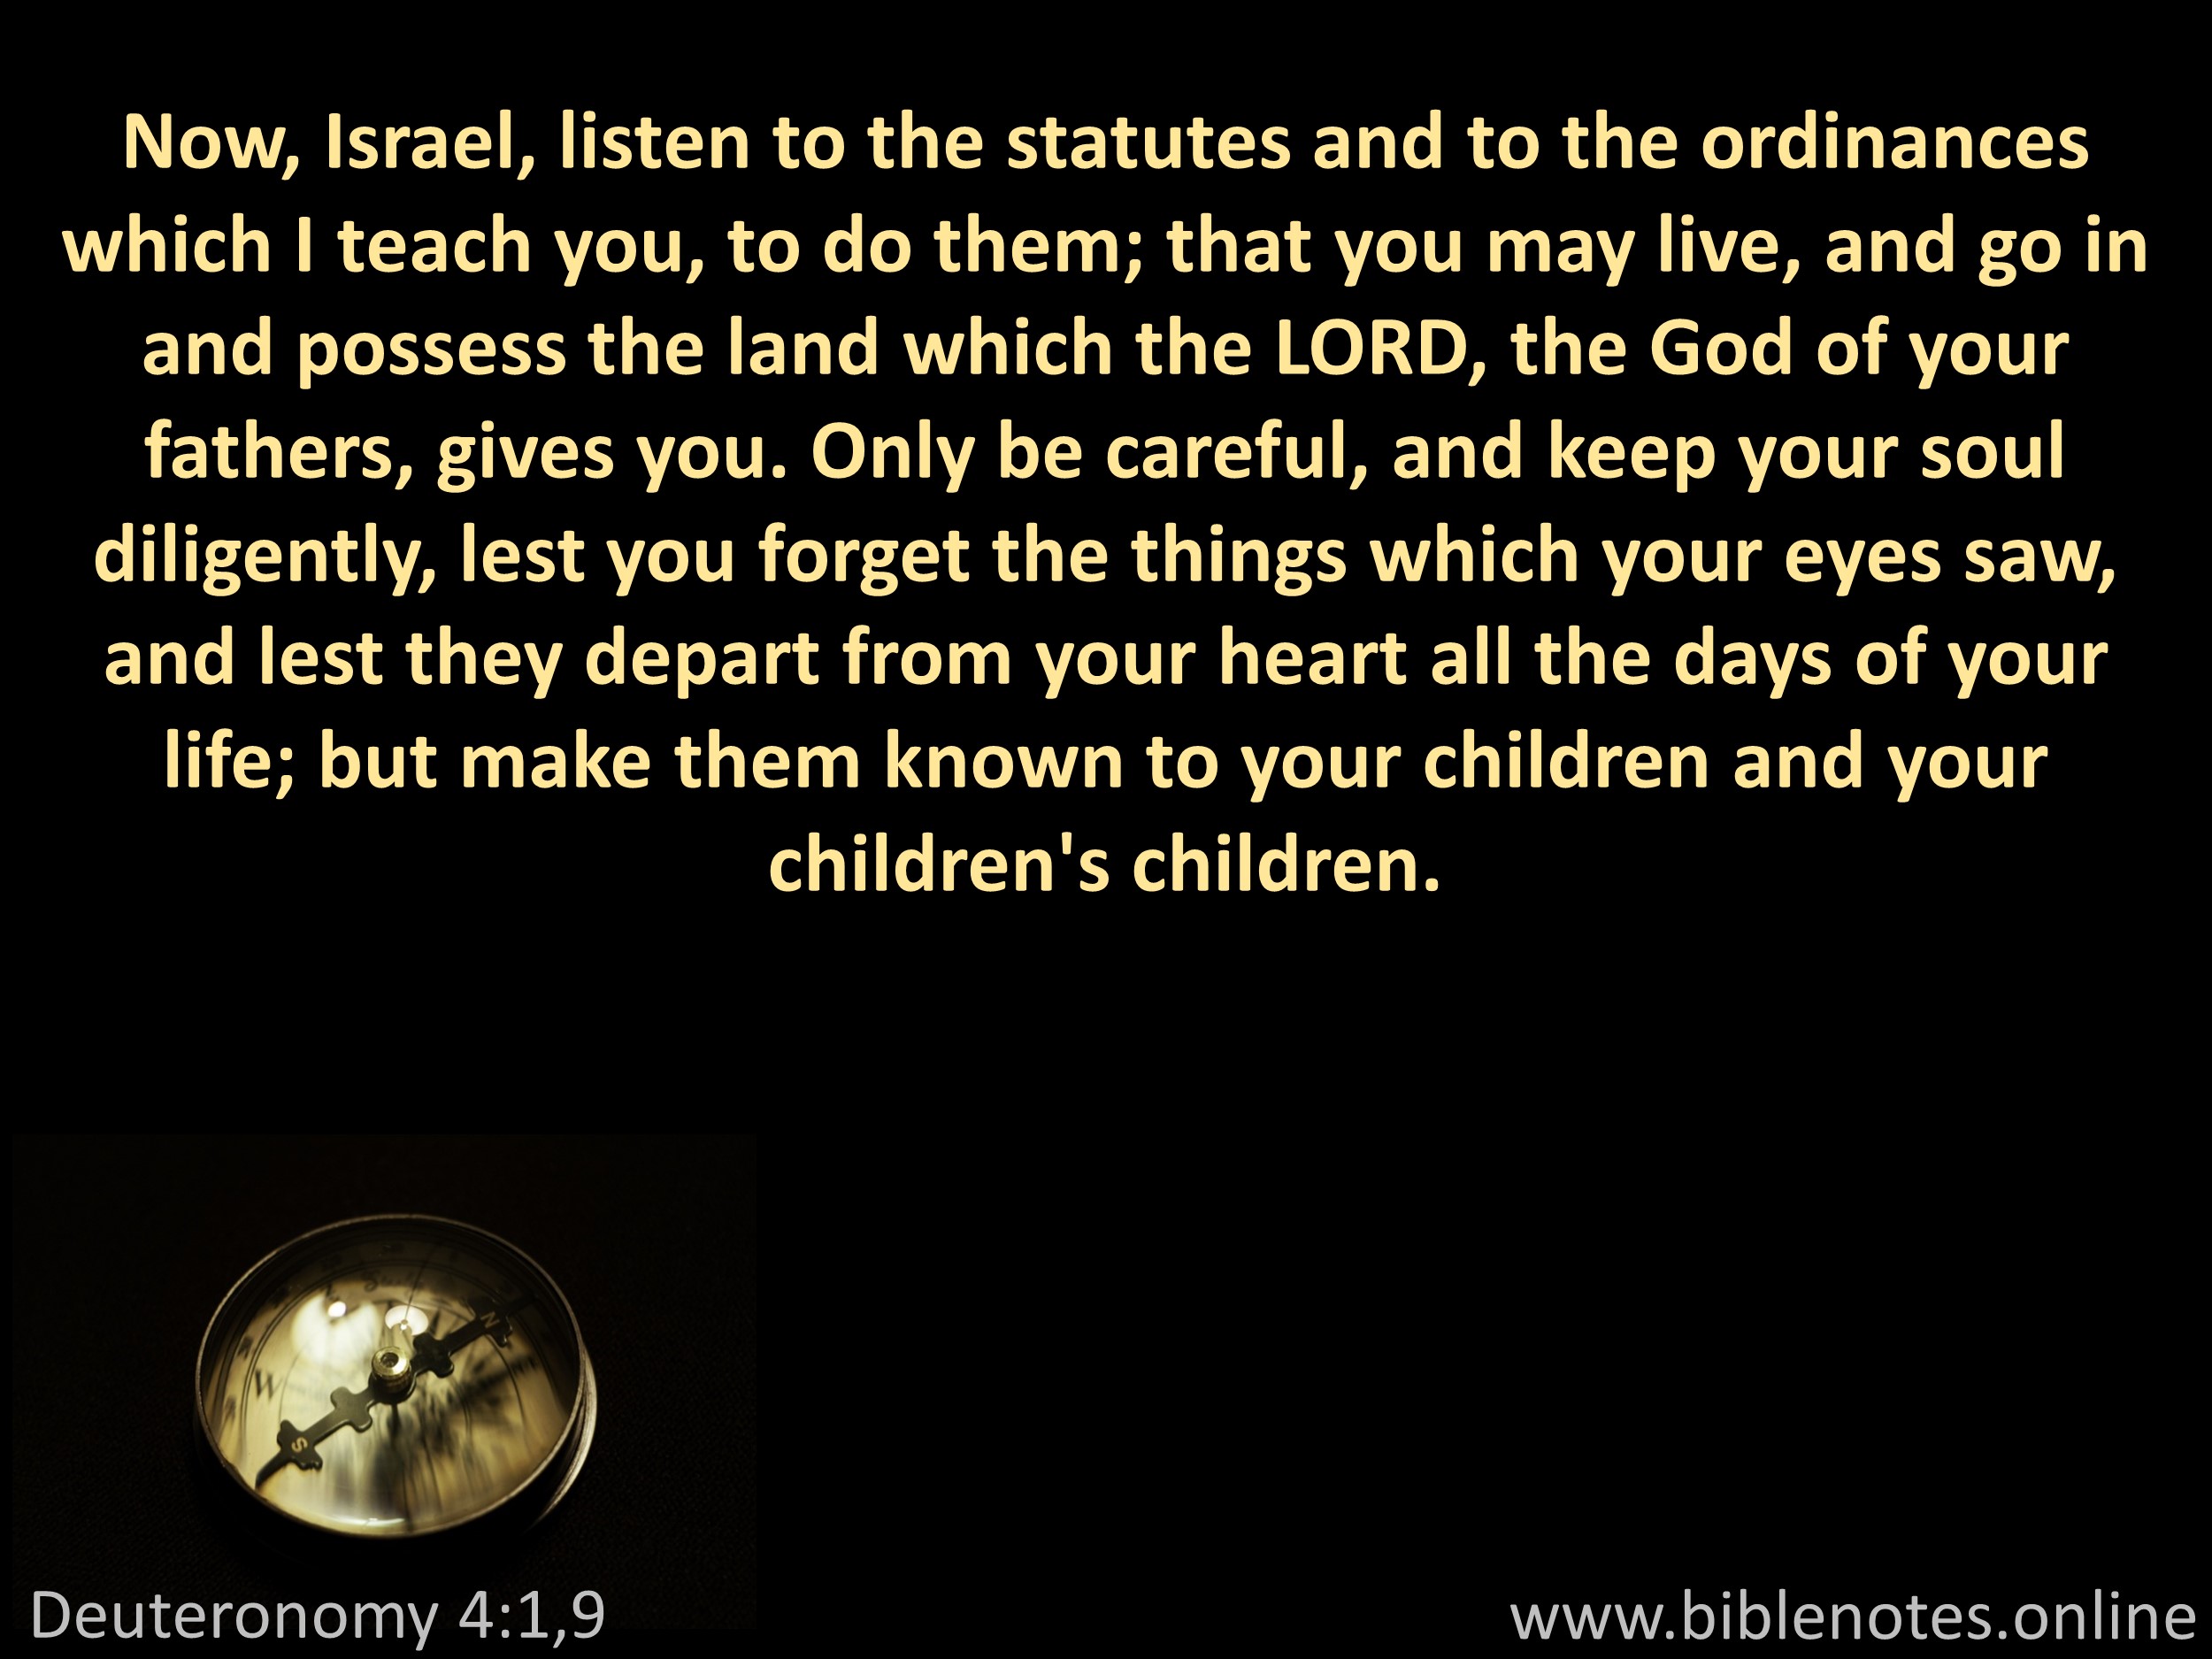 Bible Verse from Deuteronomy Chapter 4